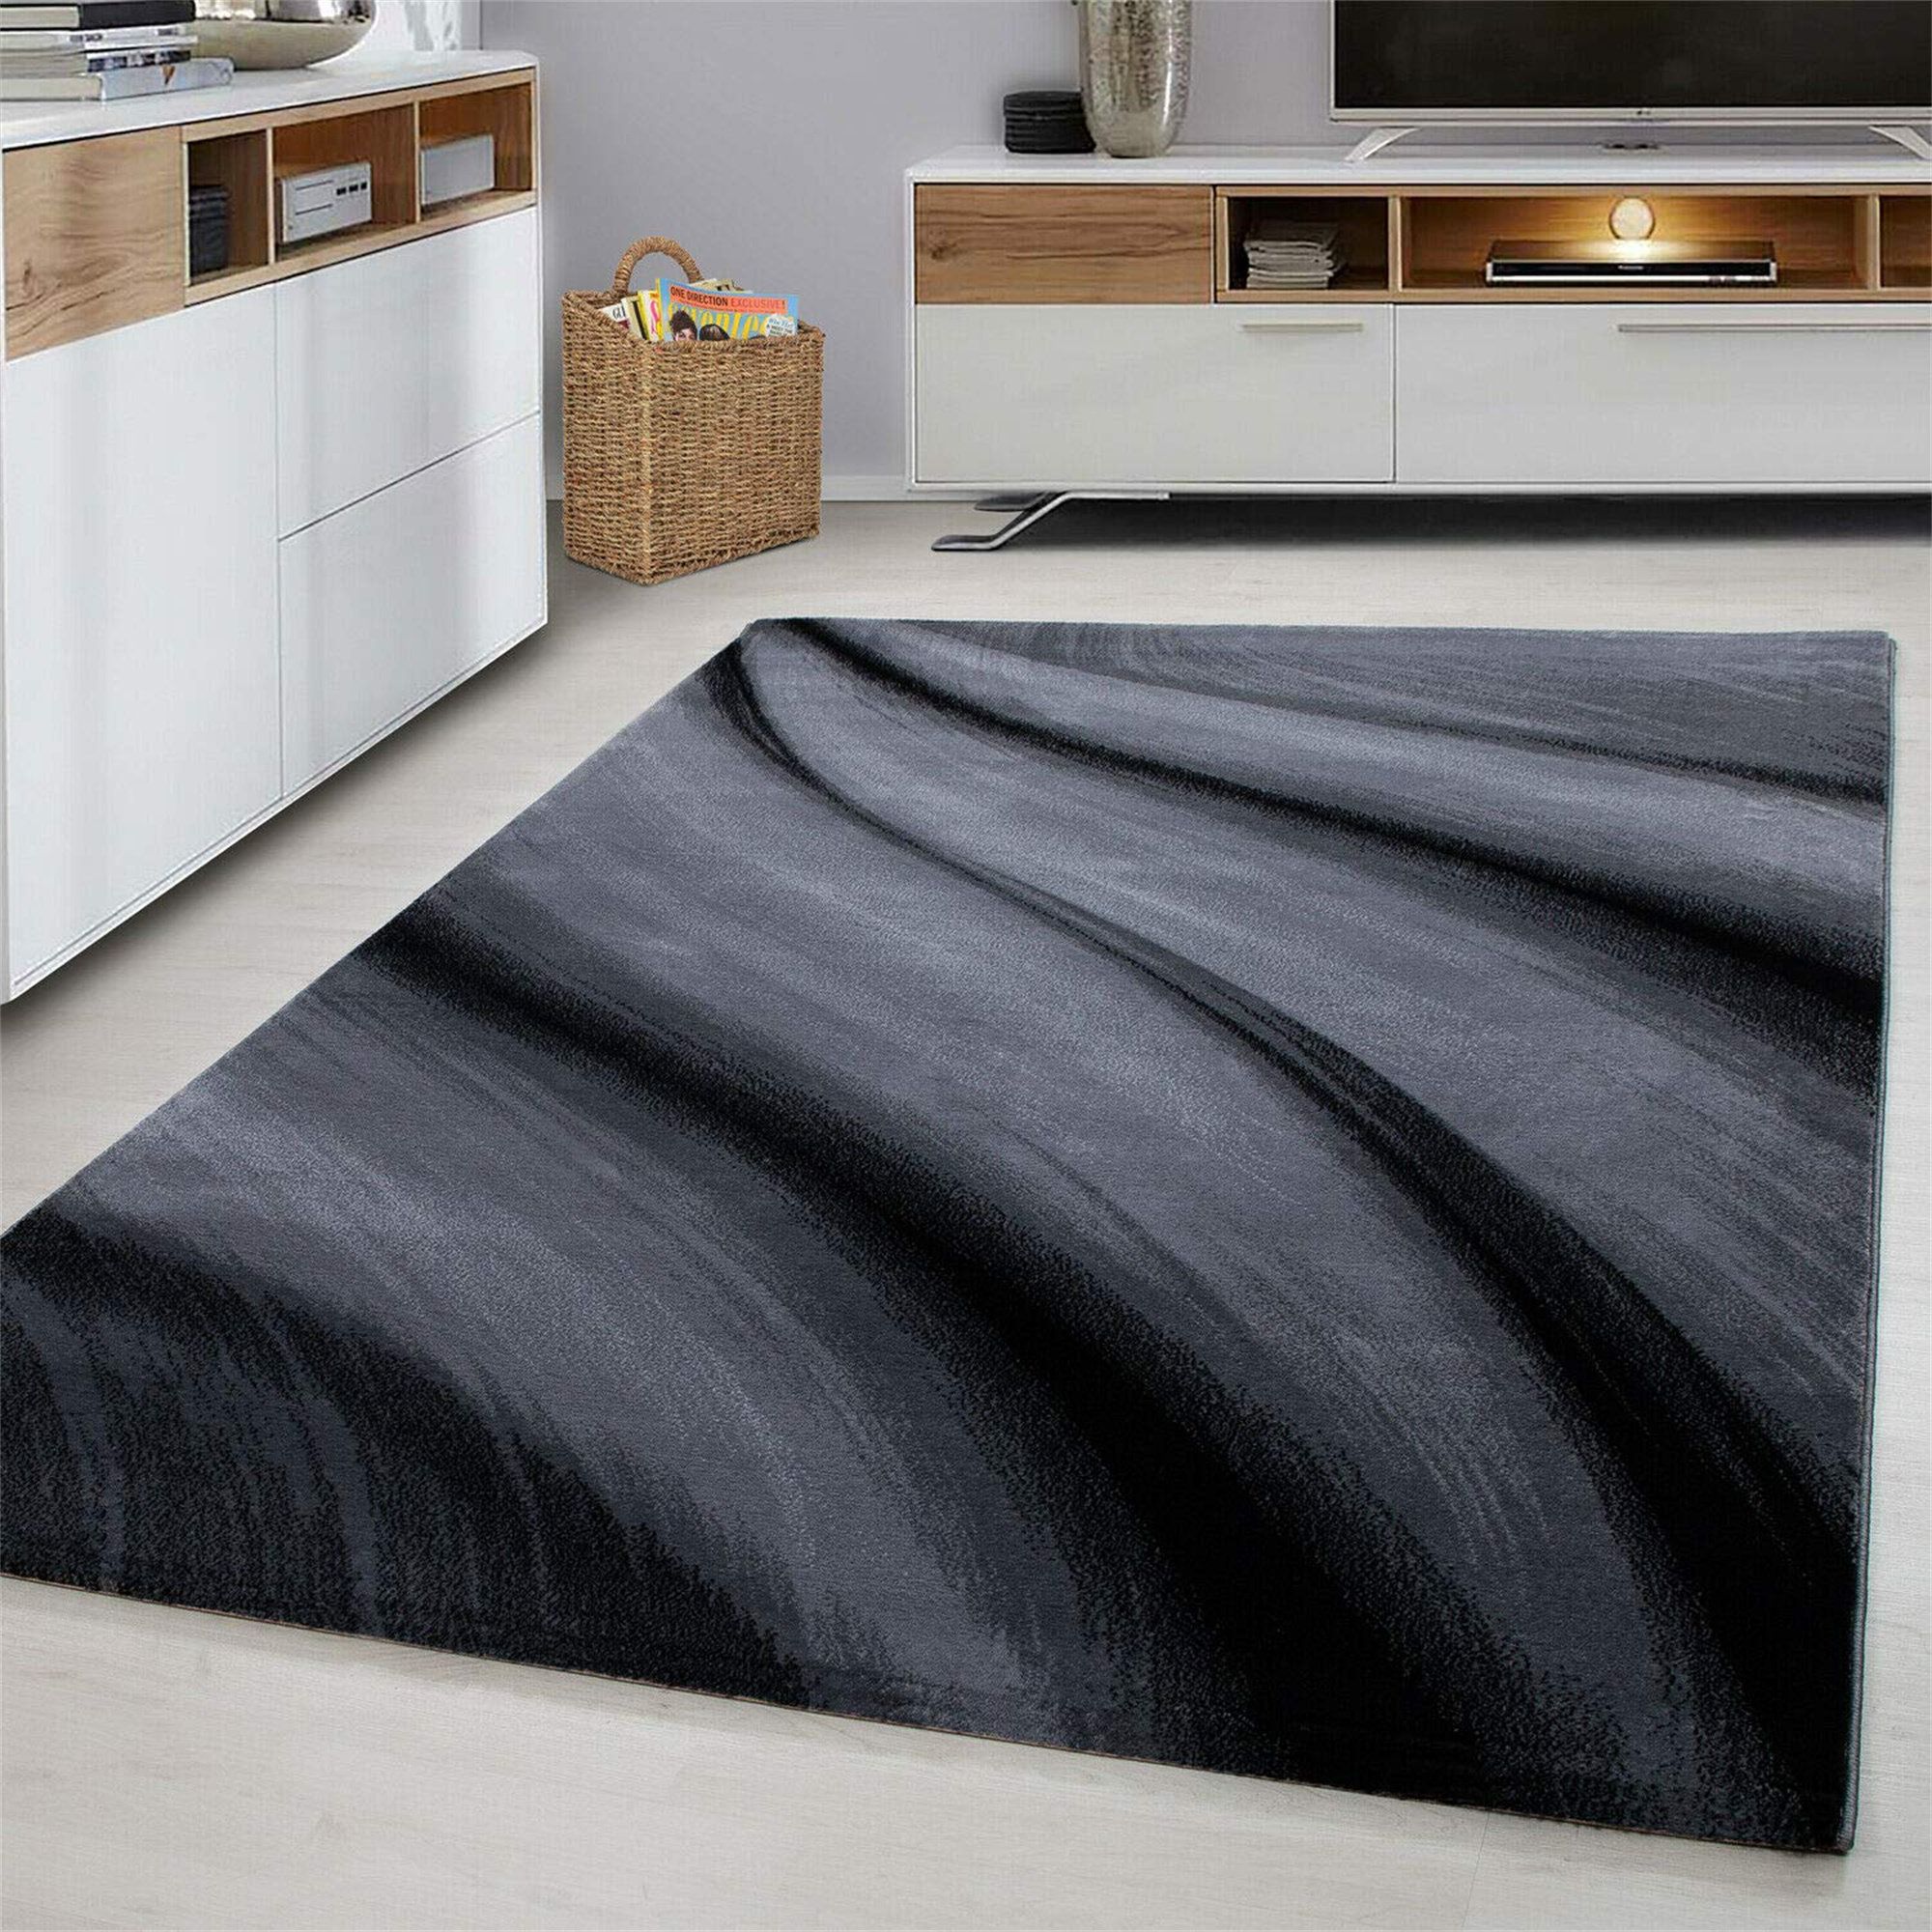 Ivy Bronx Modern Design Black Grey Charcoal Rugs Living Room Extra Large  Size Soft Touch Short Pile Style Carpet Area Rugs Non Shedding (160cm X  220cm (5.5ft X 7.2ft)) | Wayfair.co.uk Intended For Charcoal Rugs (Photo 12 of 15)